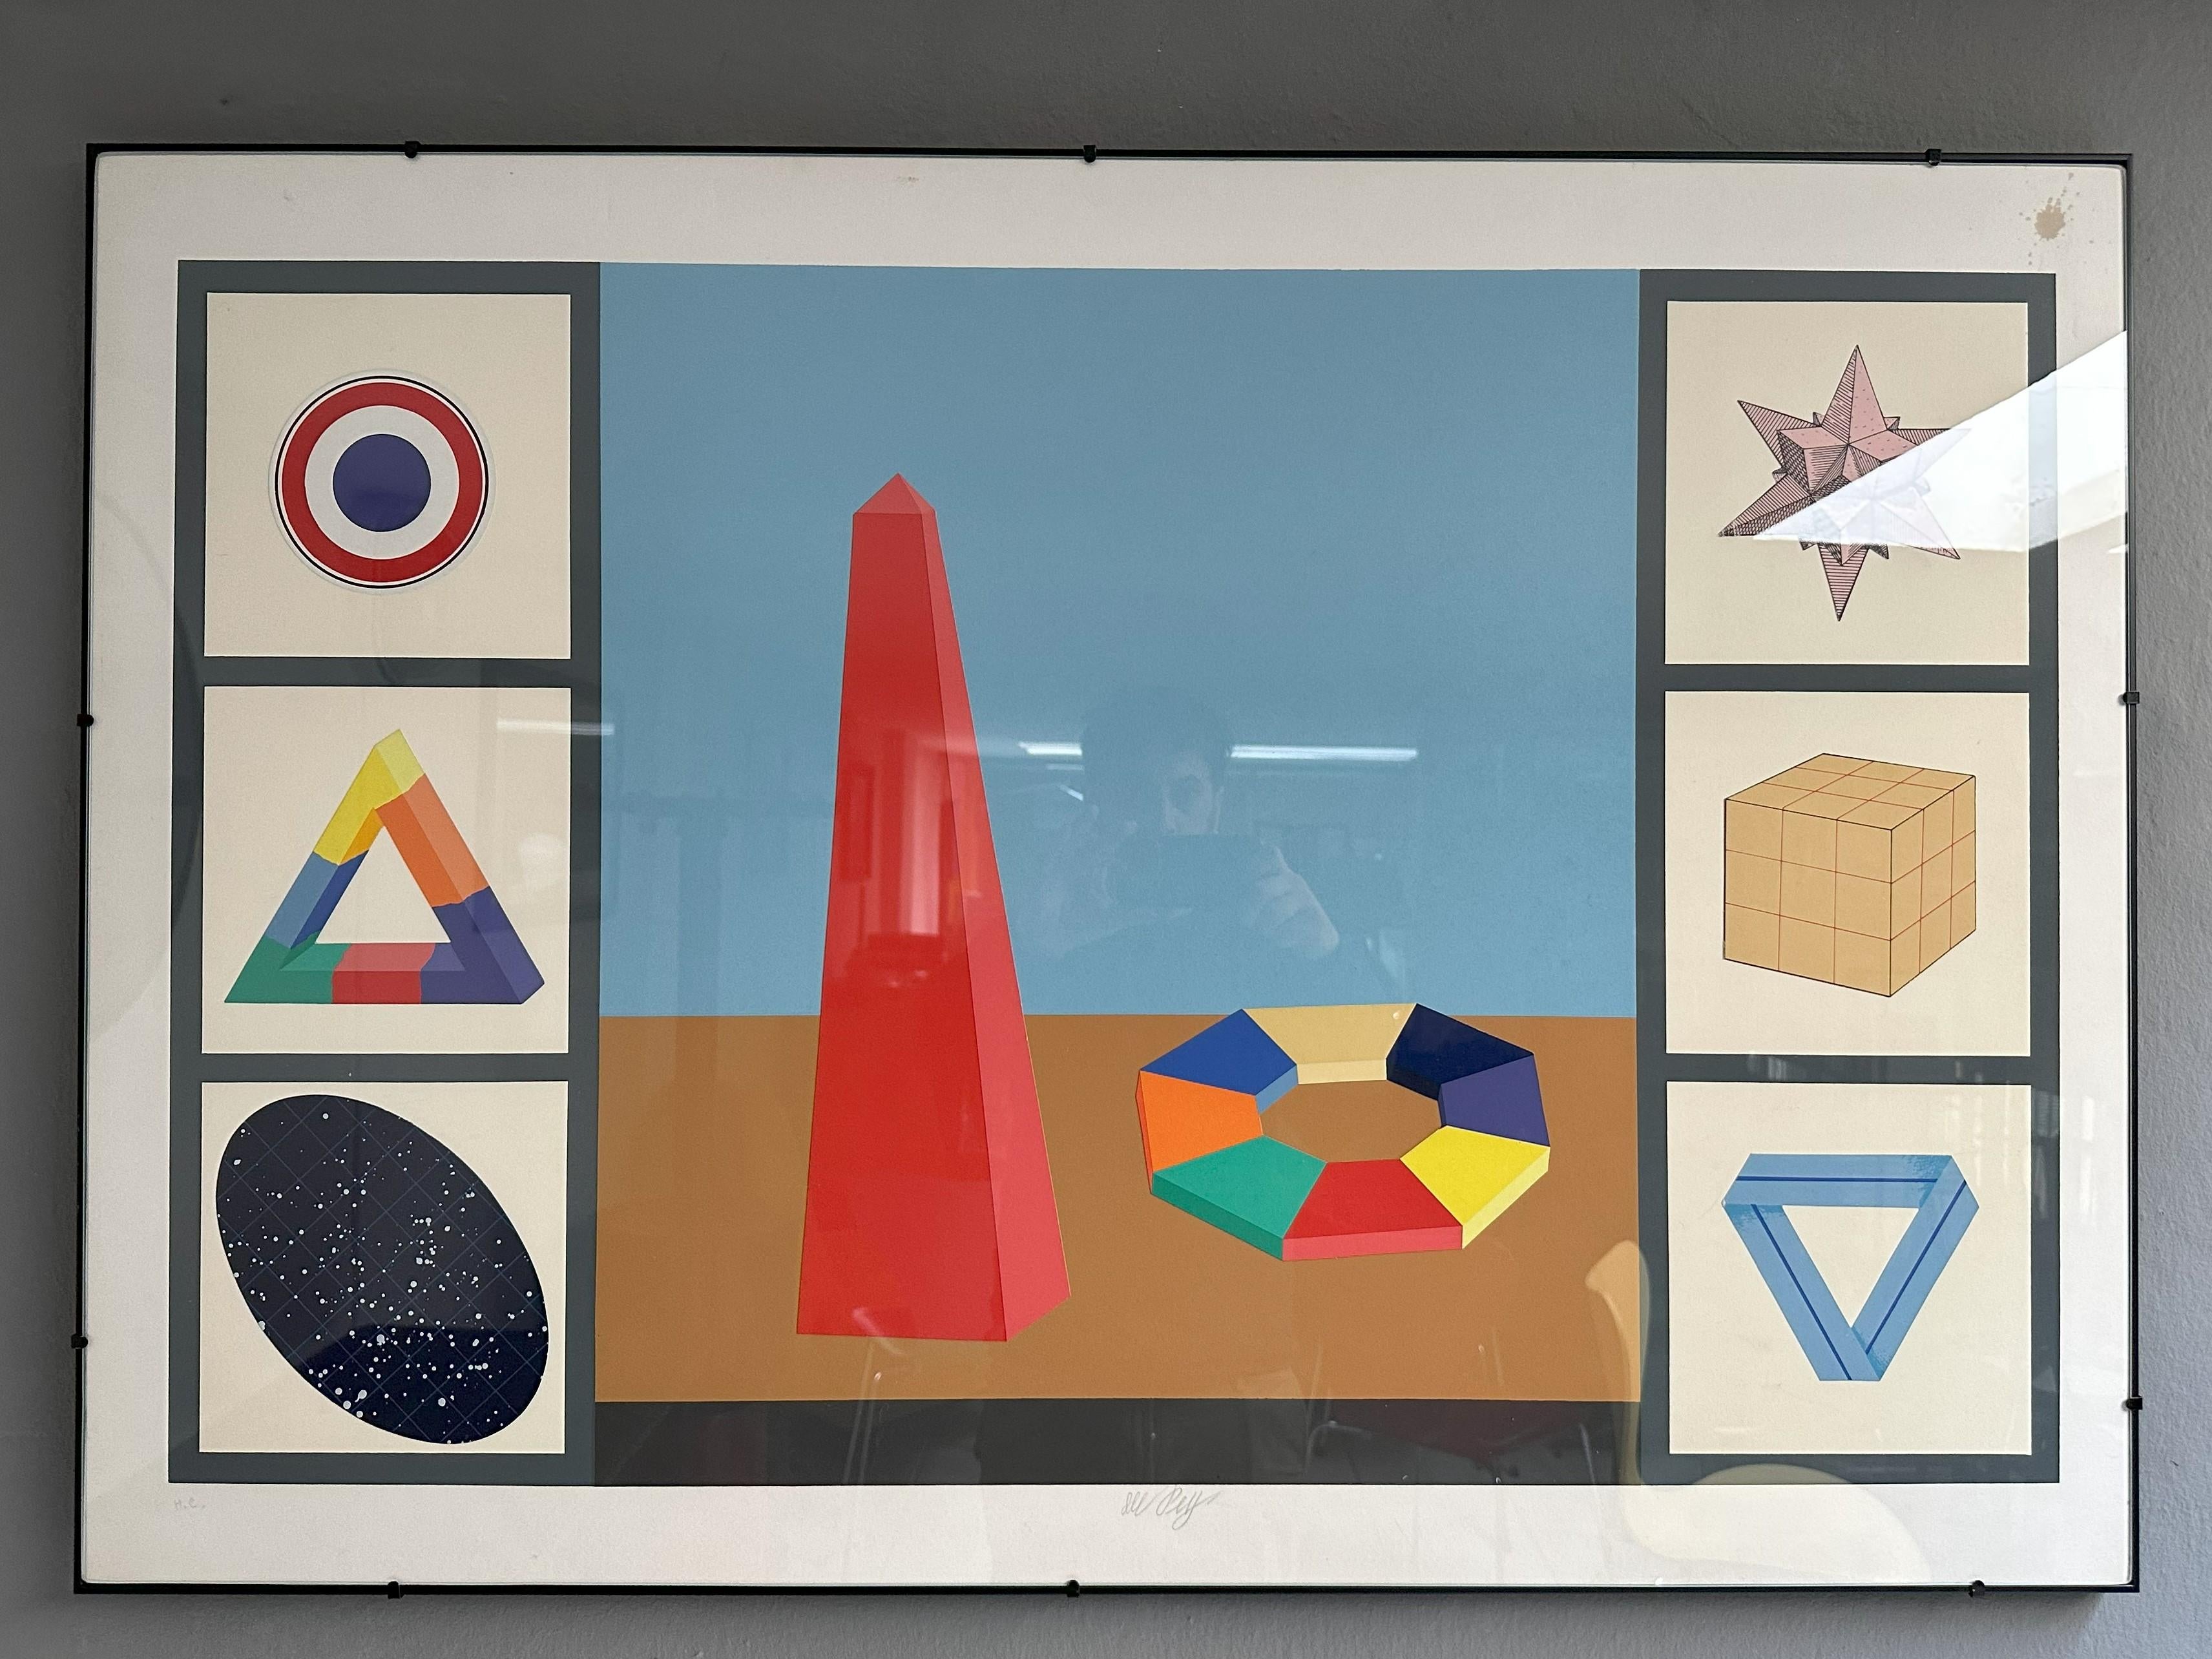 1970s, Italian silkscreen and collage on paper by Lucio Del Pezzo 'Casellario' n. 148/200.
Inside a geometric panel the artist has applied through collage a series of reproductions of objects and regular shapes using different colors and creating a